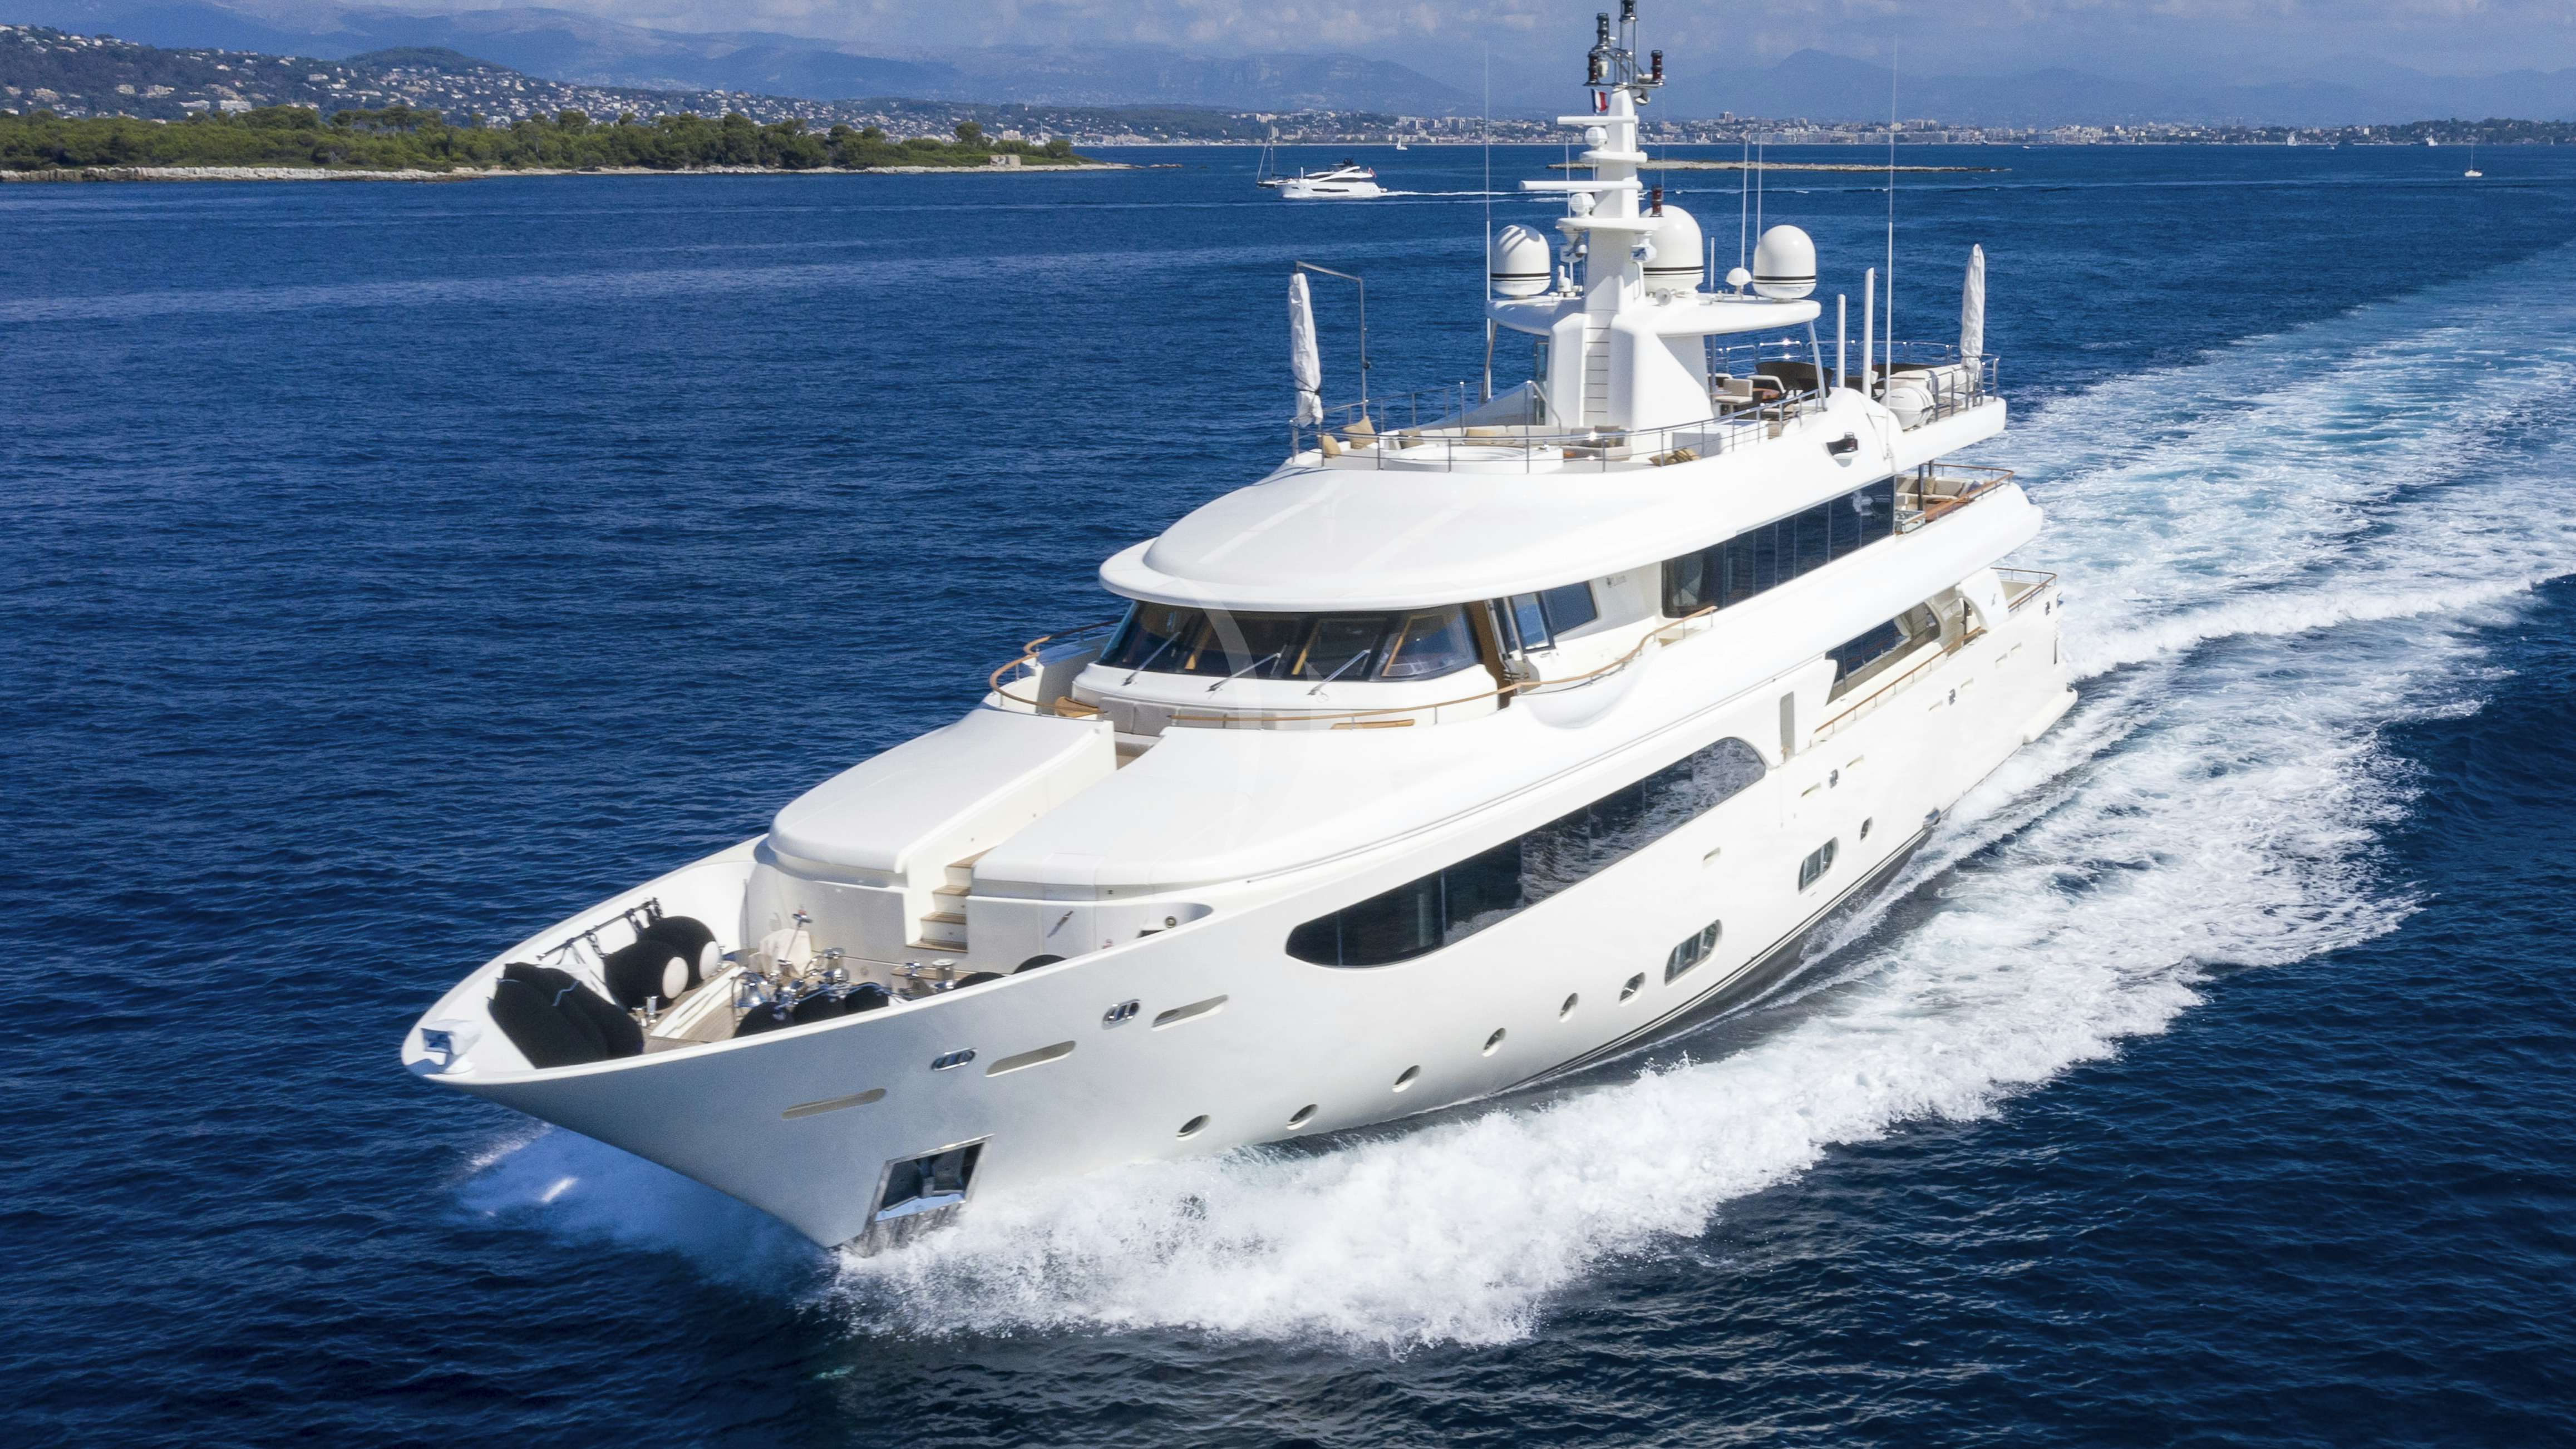 Watch Video for O'LION Yacht for Charter